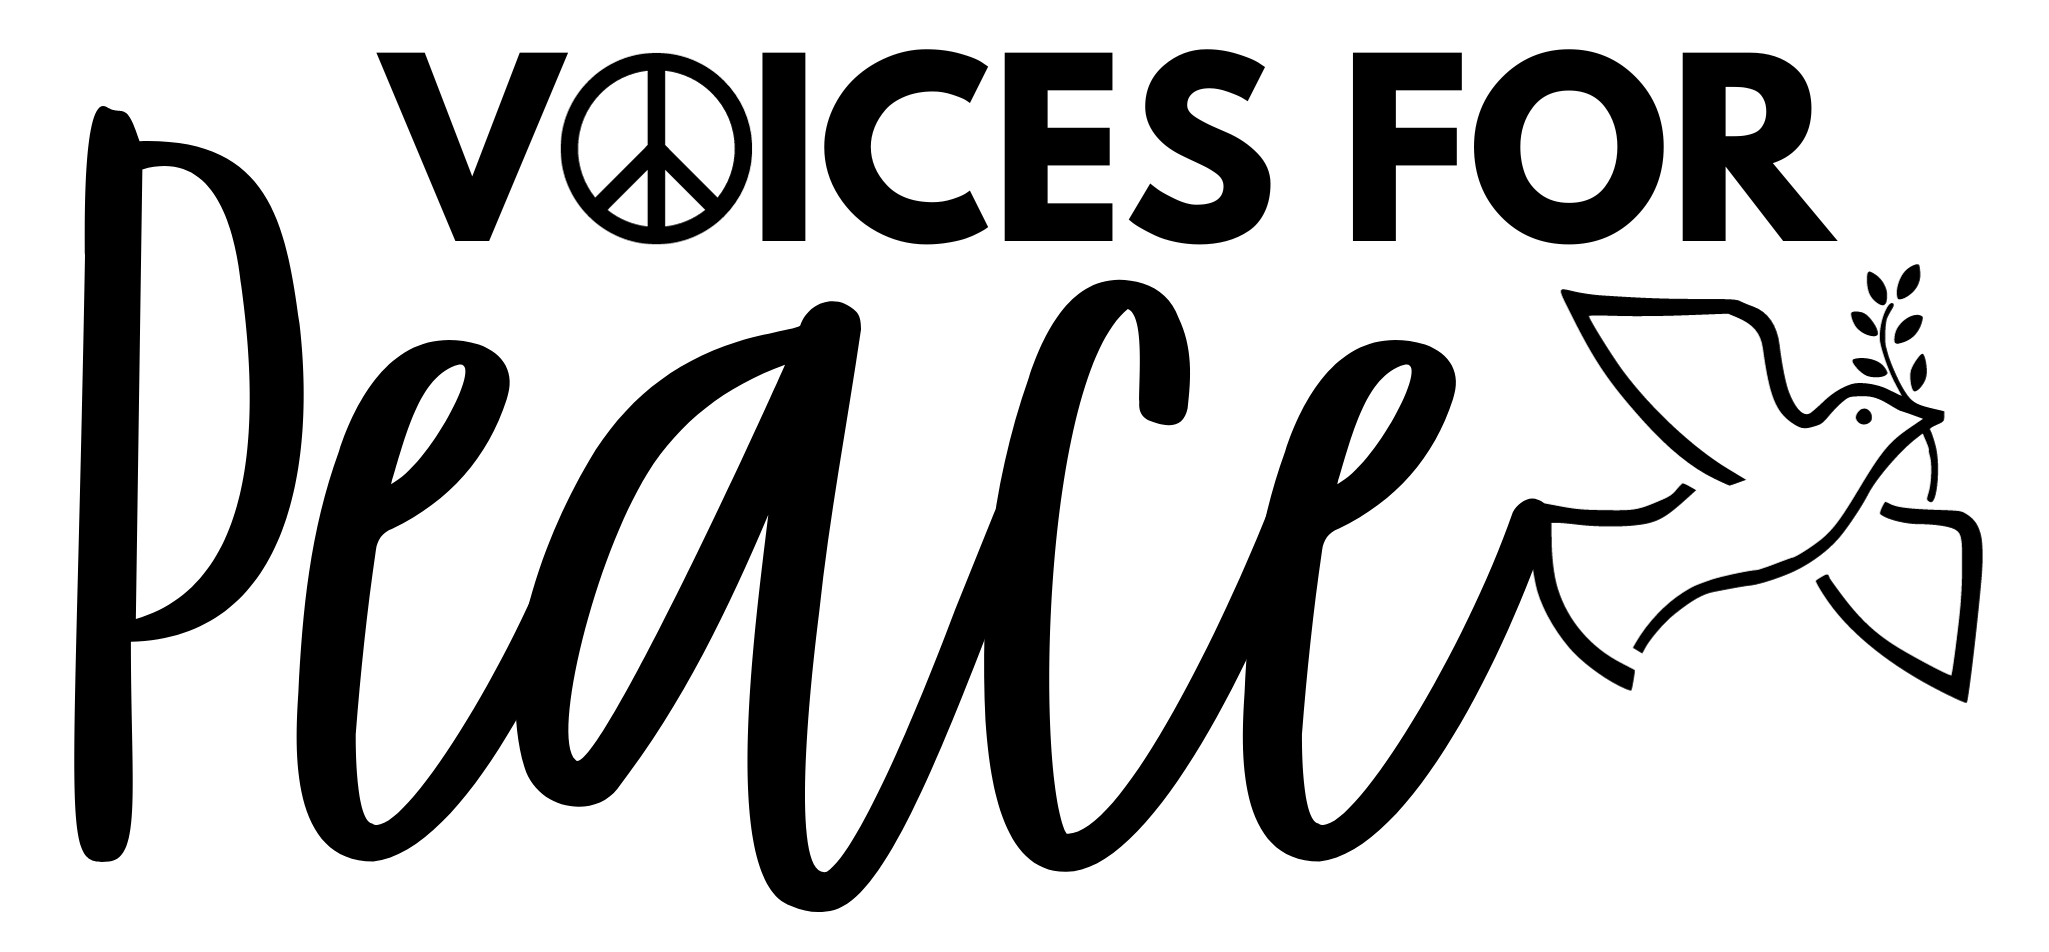 voices for peace